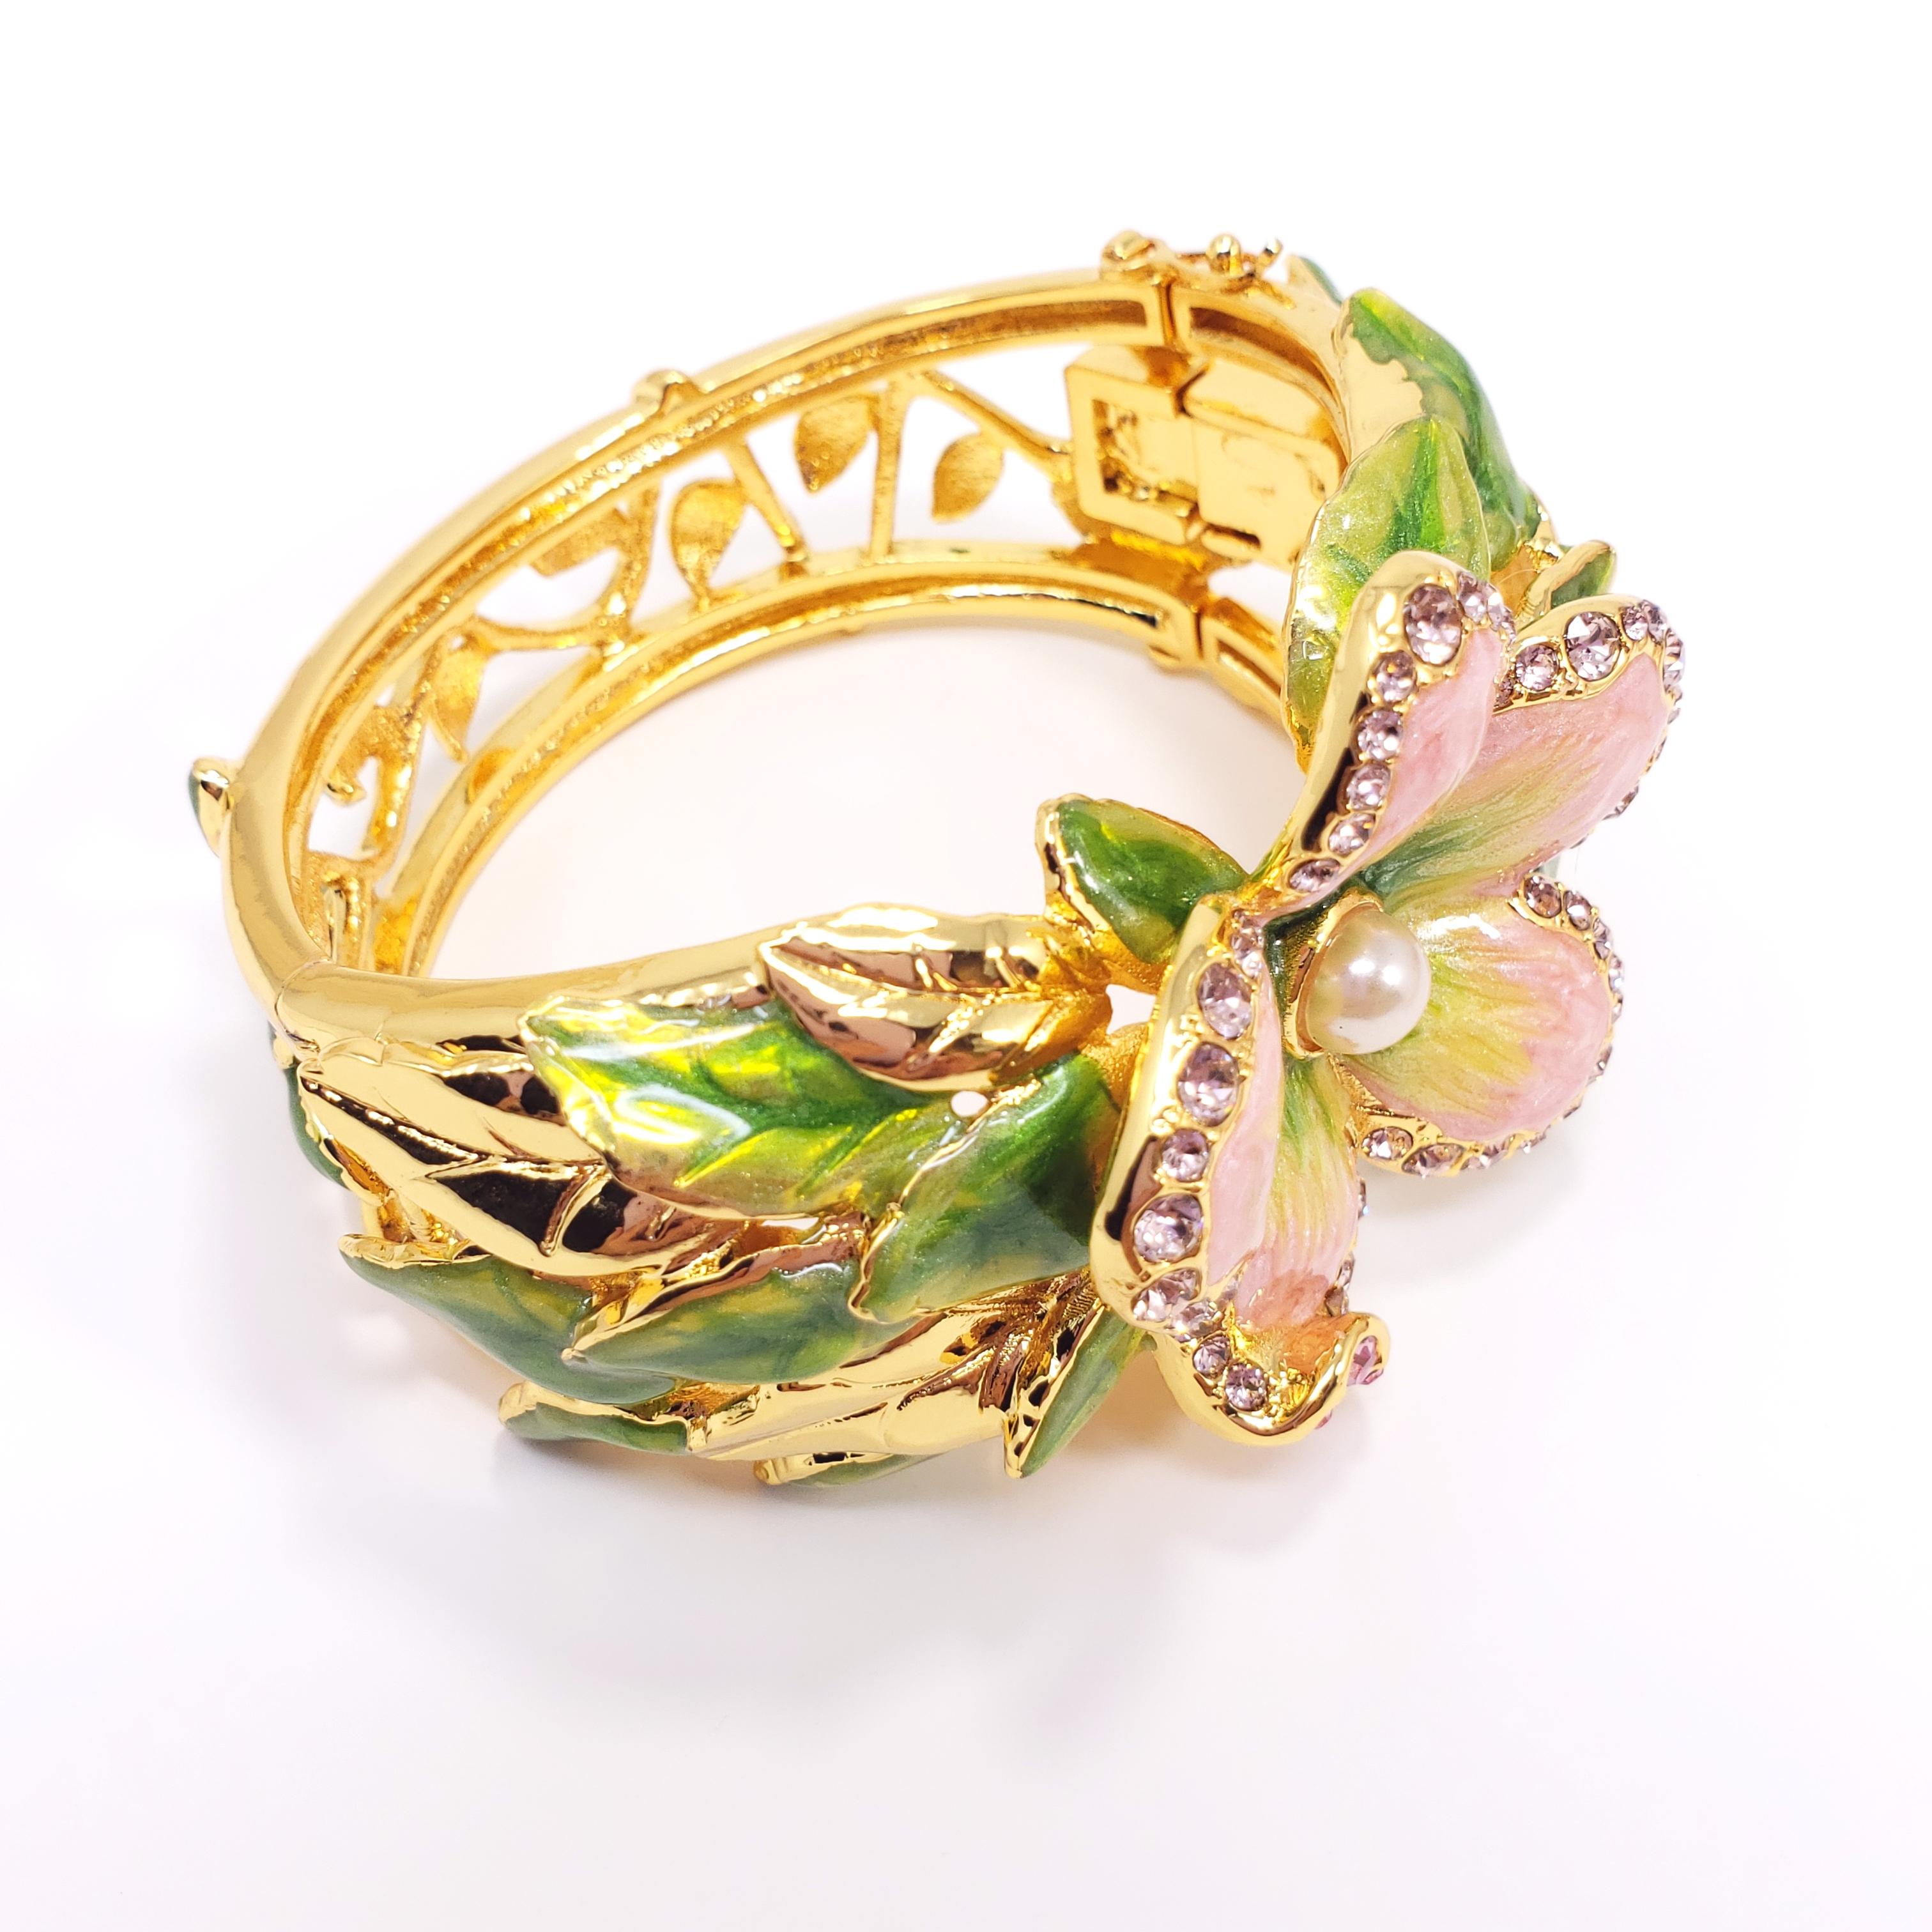 Flower power! An ornate floral bracelet pink crystals, green and violet enamel, and a single faux pearl. The central flower sits upon layers of leaves on each side.

Dimensions: Height 4 cm / 1.6 in, inner diameter at widest part 6 cm / 2.36 in,